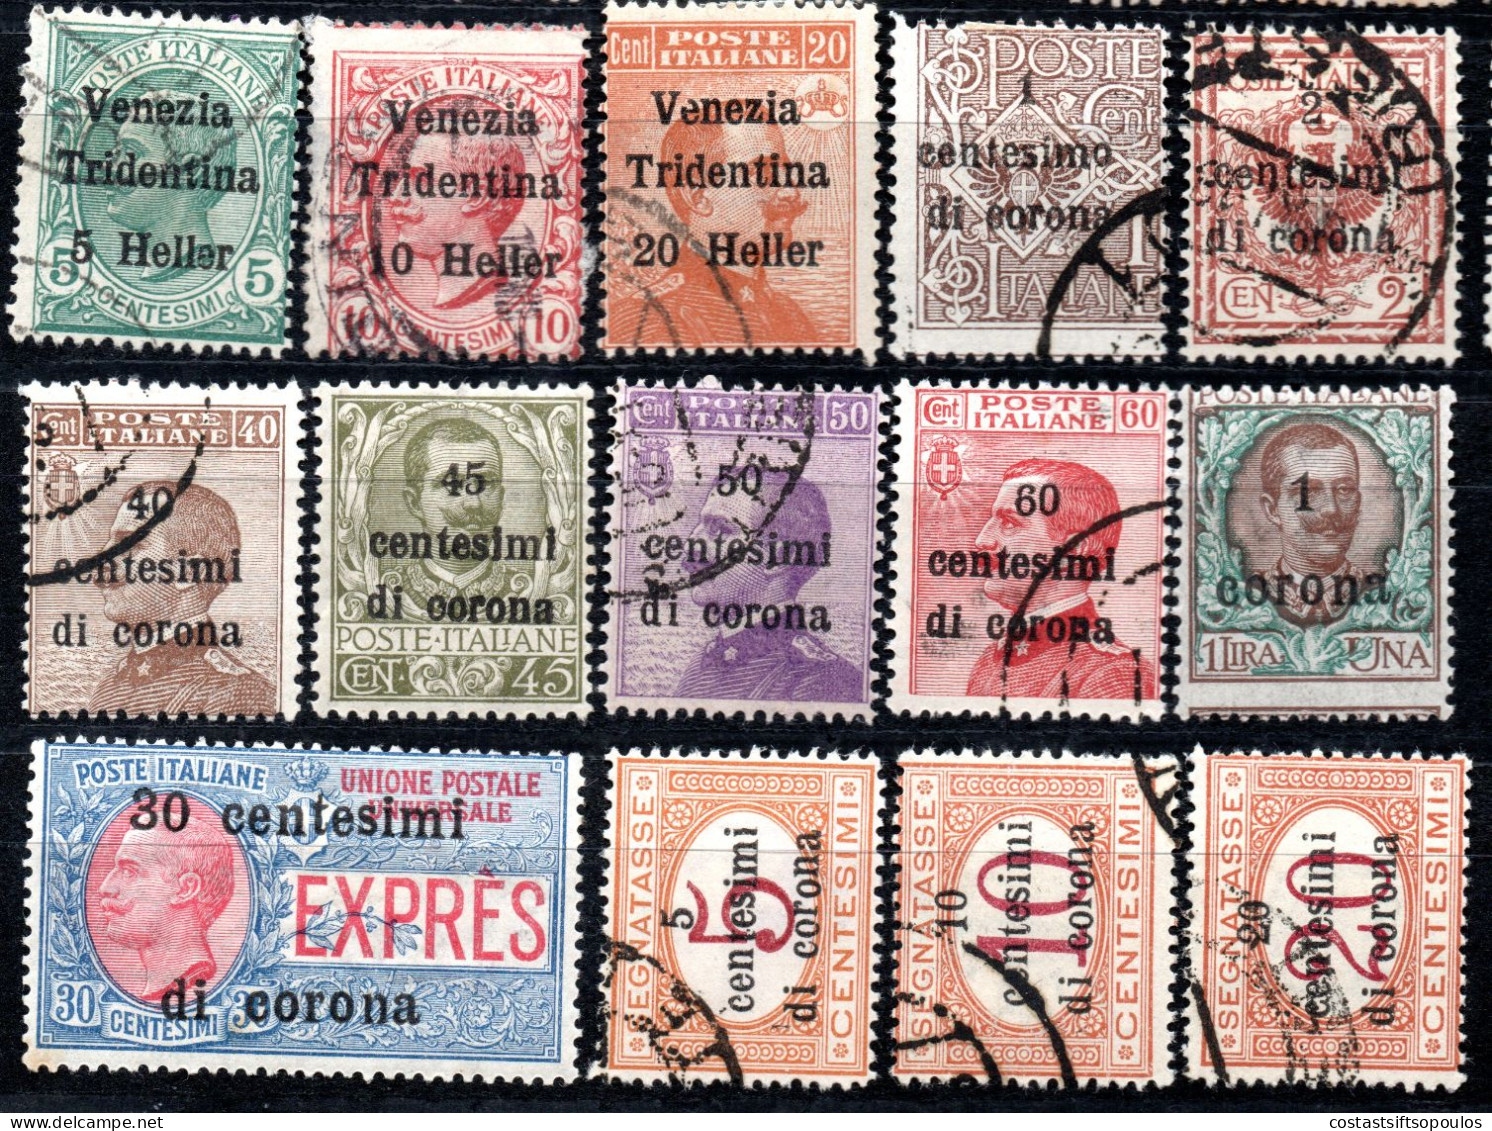 2145.AUSTRIA. ITALY. TRENTINO 1919-1920 41 ST. LOT.POSSIBLY SOME NOT GENUINE. GENERALLY GOOD CONDITION - Oest. Besetzung